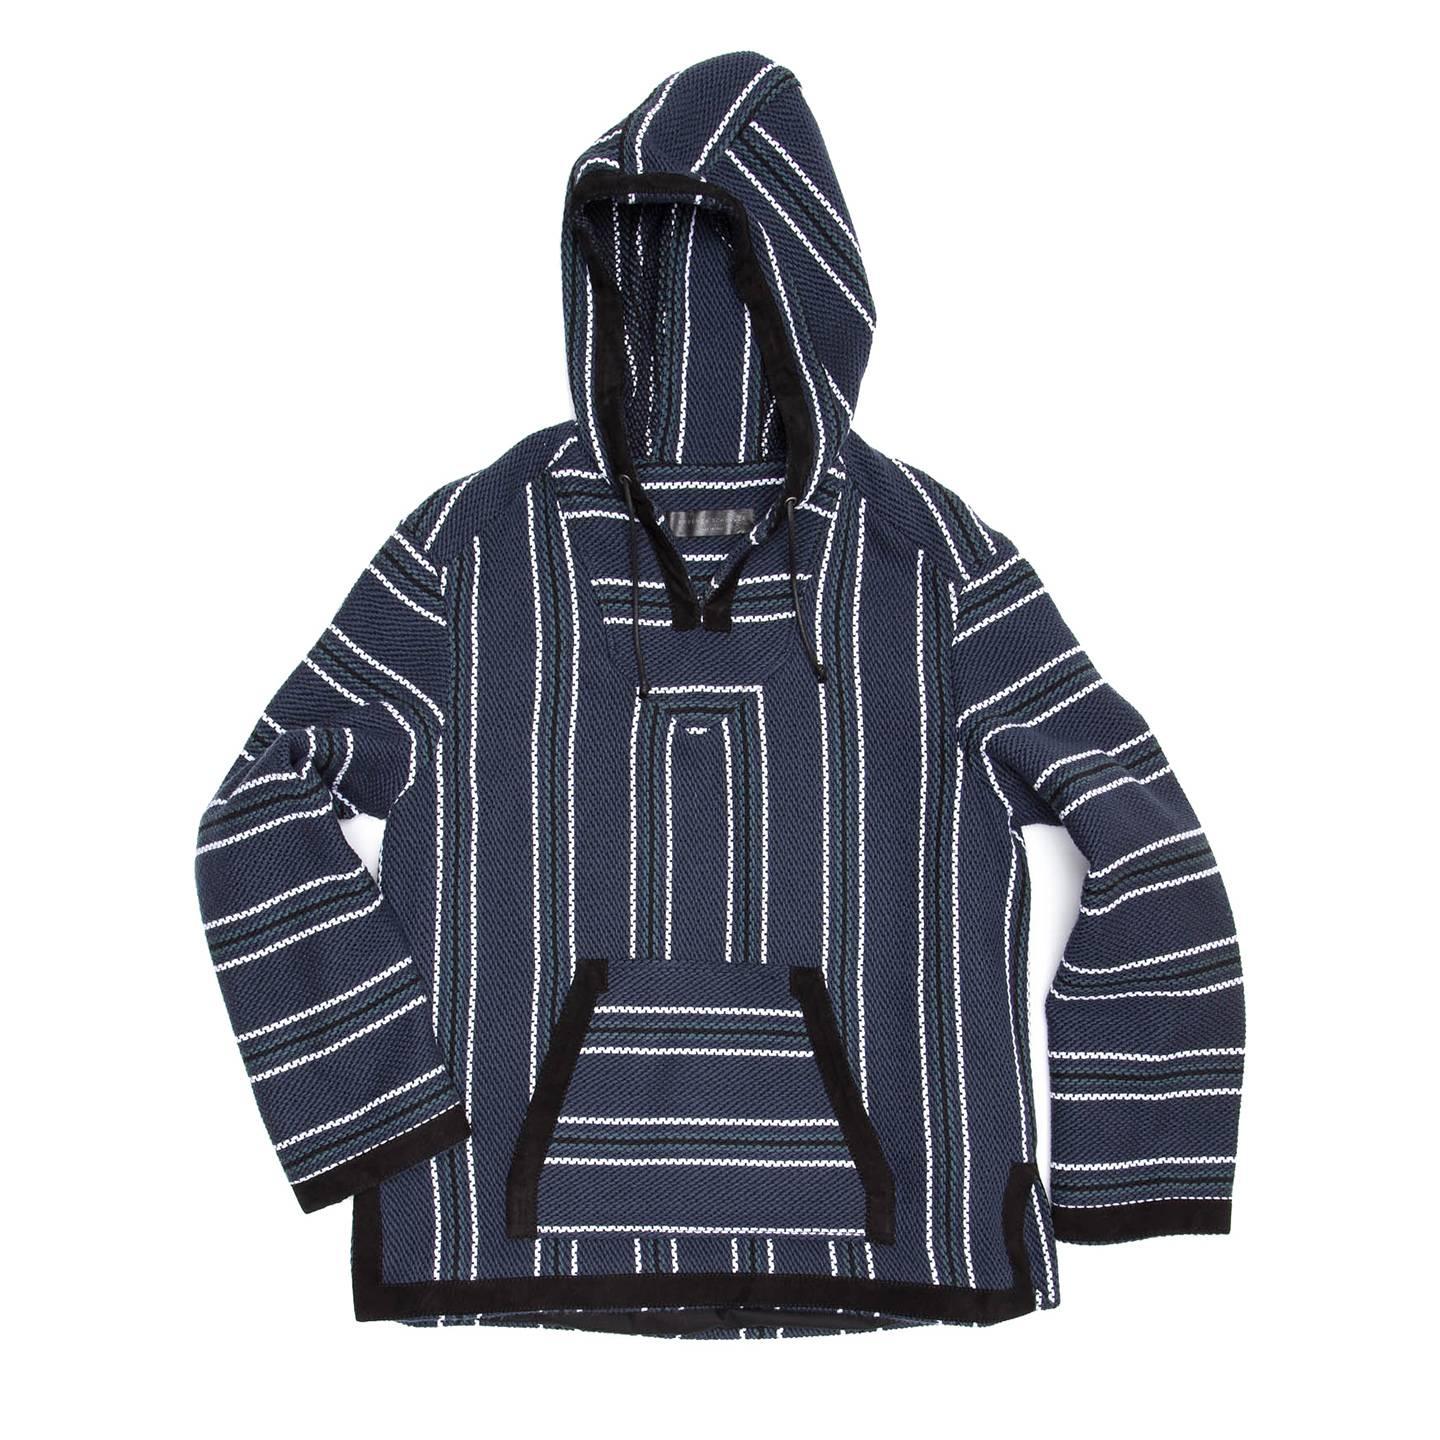 Proenza Schouler navy blue cotton blend boho ethnic style hoodie with petrol blue, black and white stripes. The front has a kangaroo patch pocket. Hem, cuffs, pocket and hood profiles are enriched by a black suede tape; body and sleeves are lined